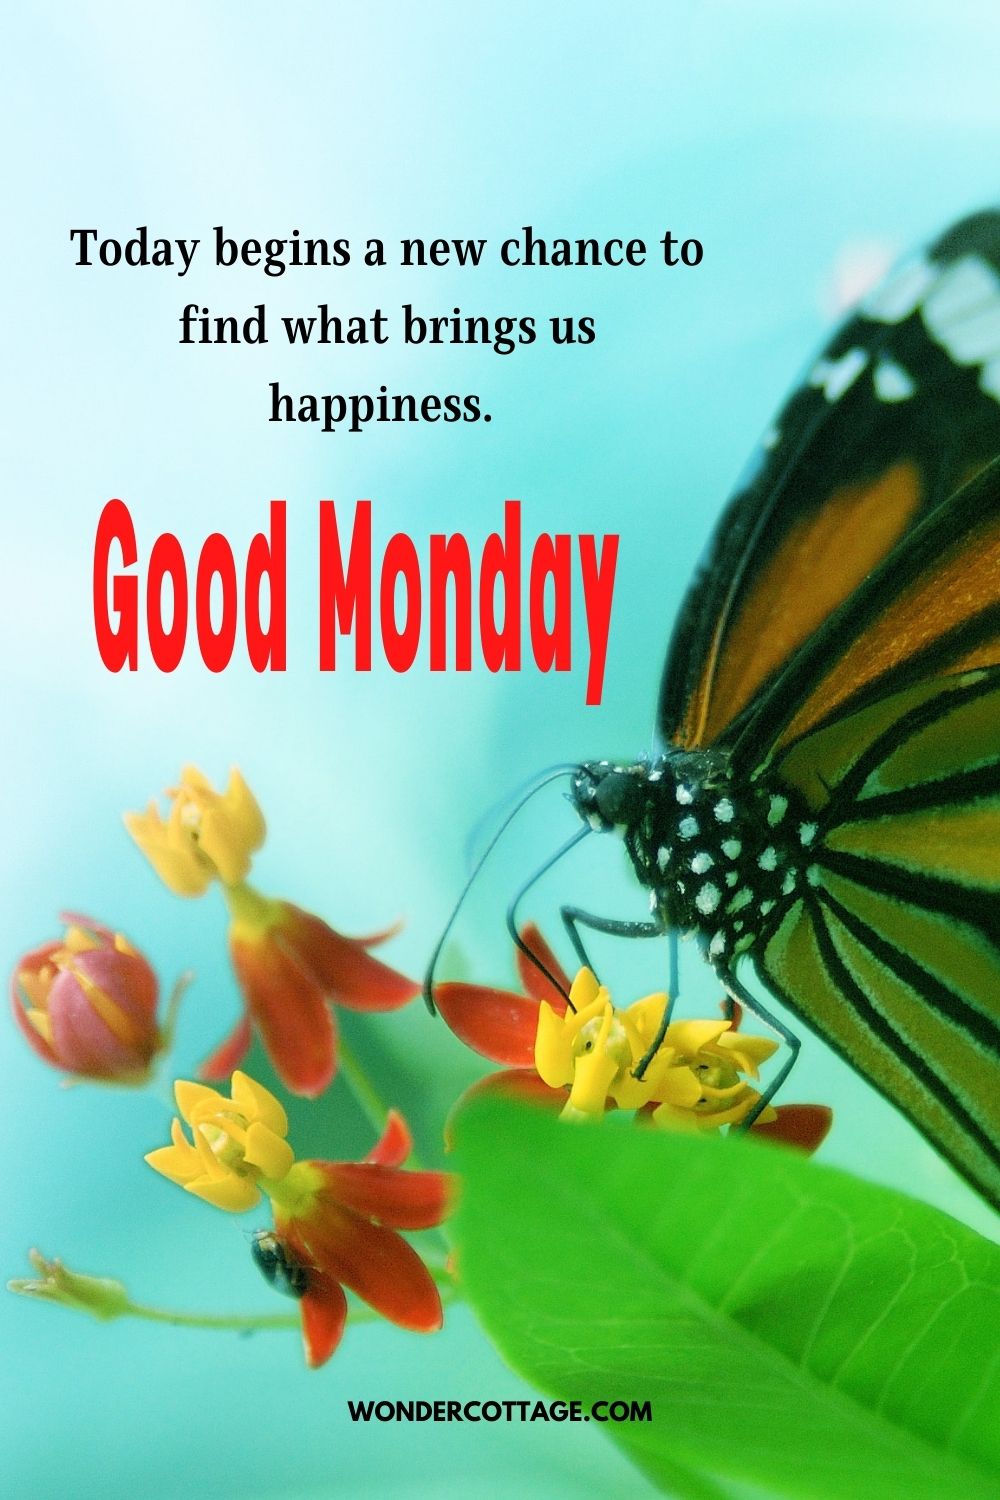 Today begins a new chance to find what brings us happiness. Good Monday